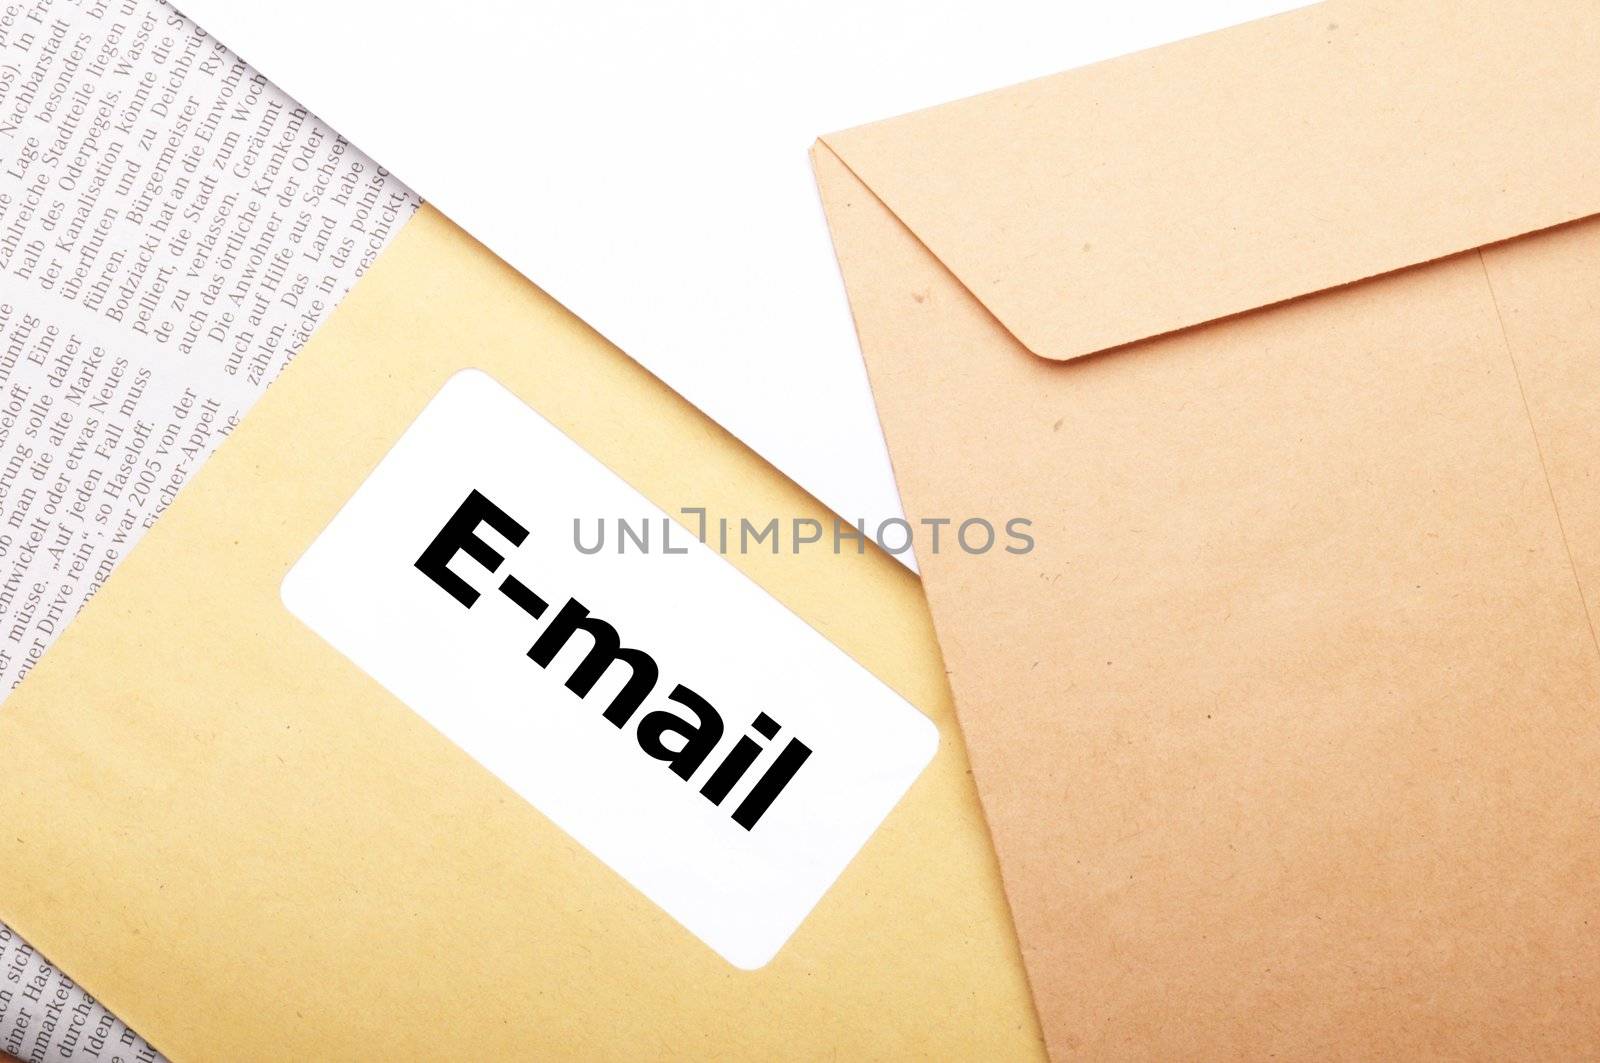 e-mail or internet communication concept with envelope an word